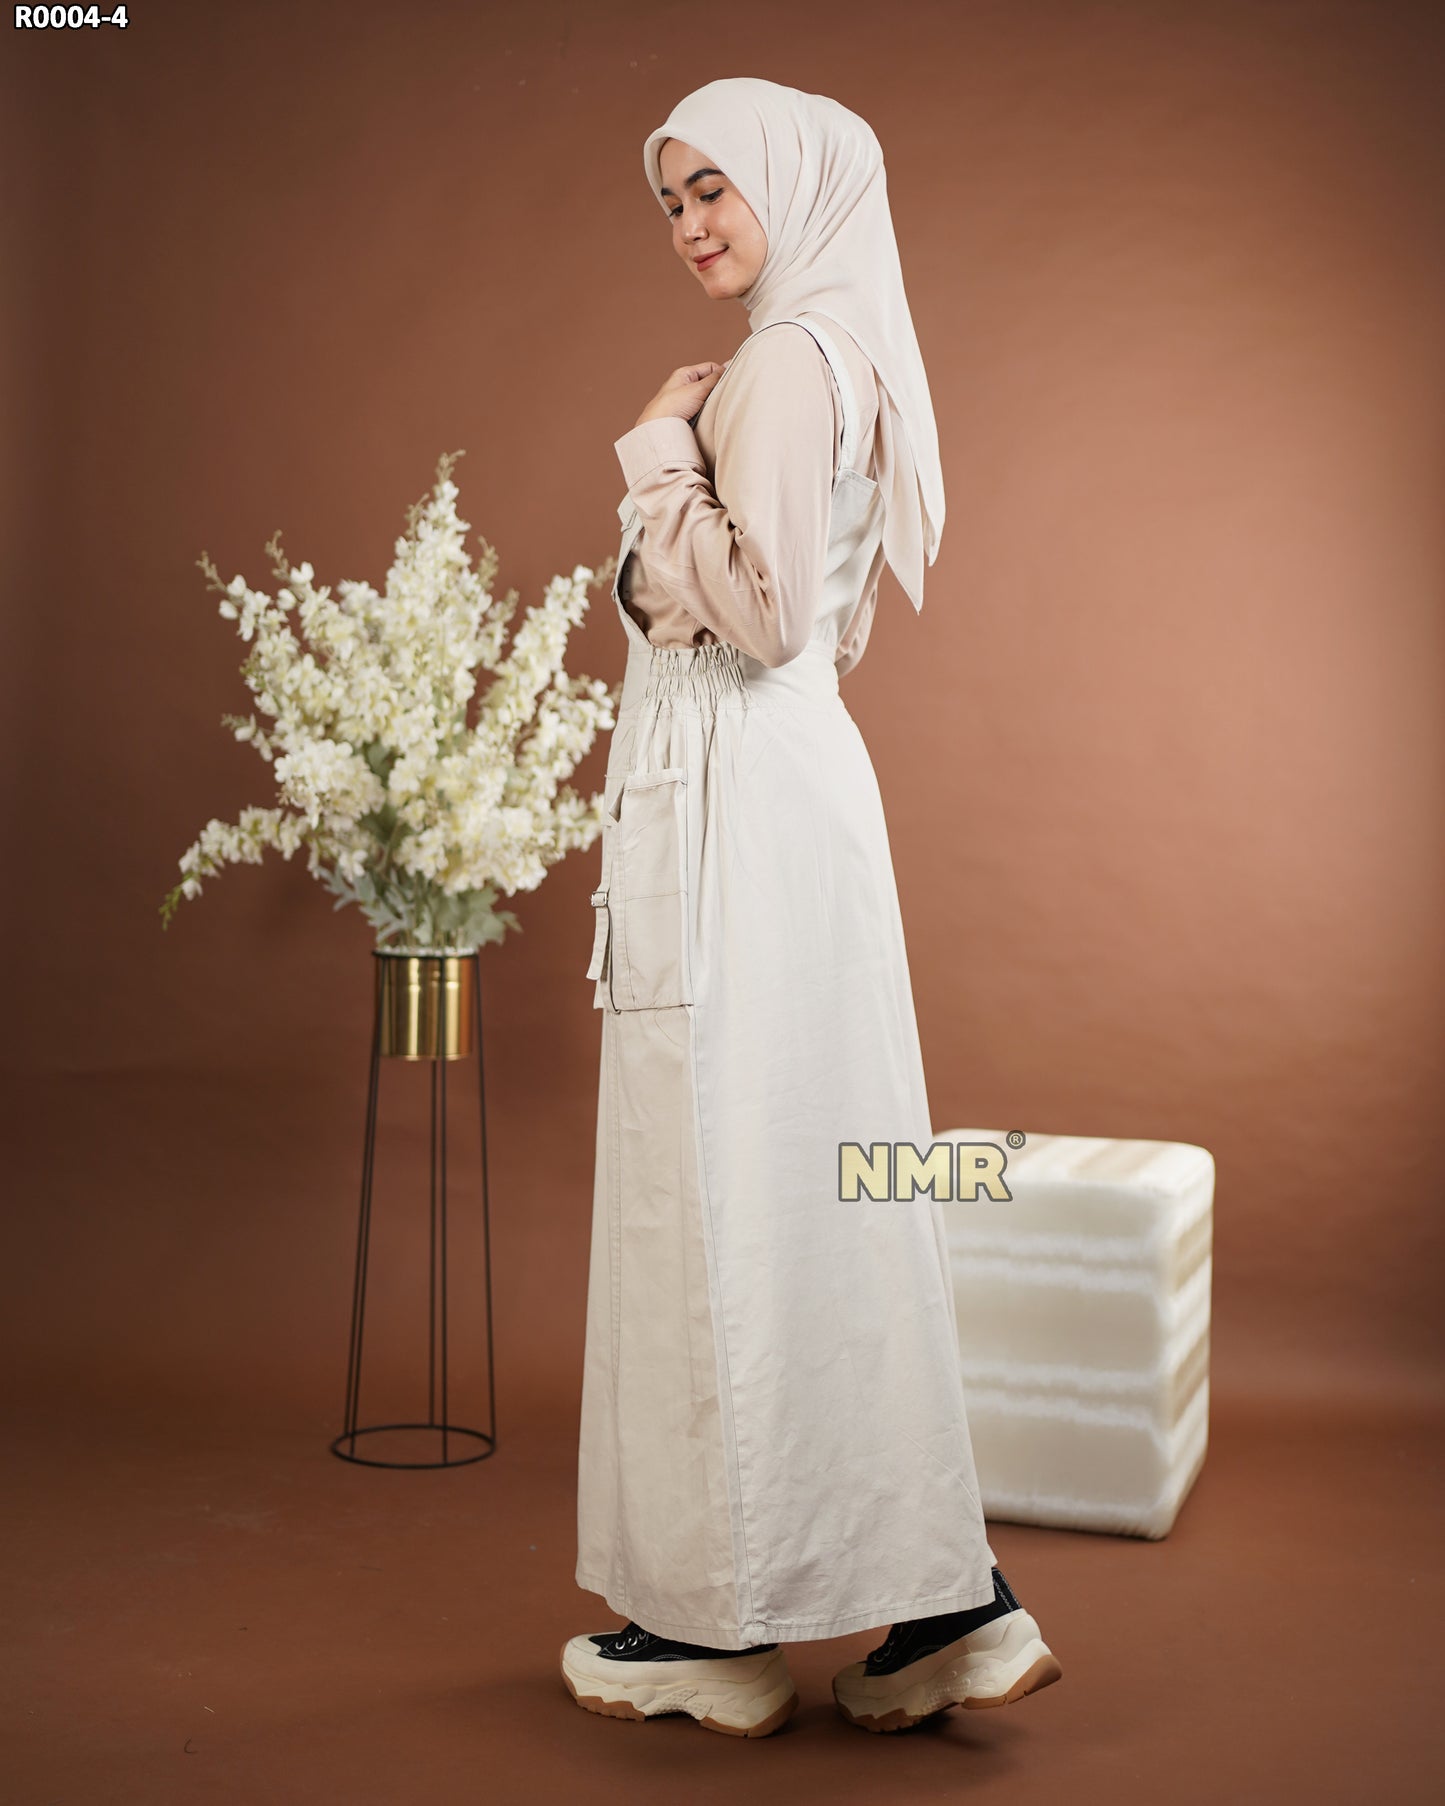 NMR Gamis Jumpsuit Overall Baby Canvas Vol R004-4